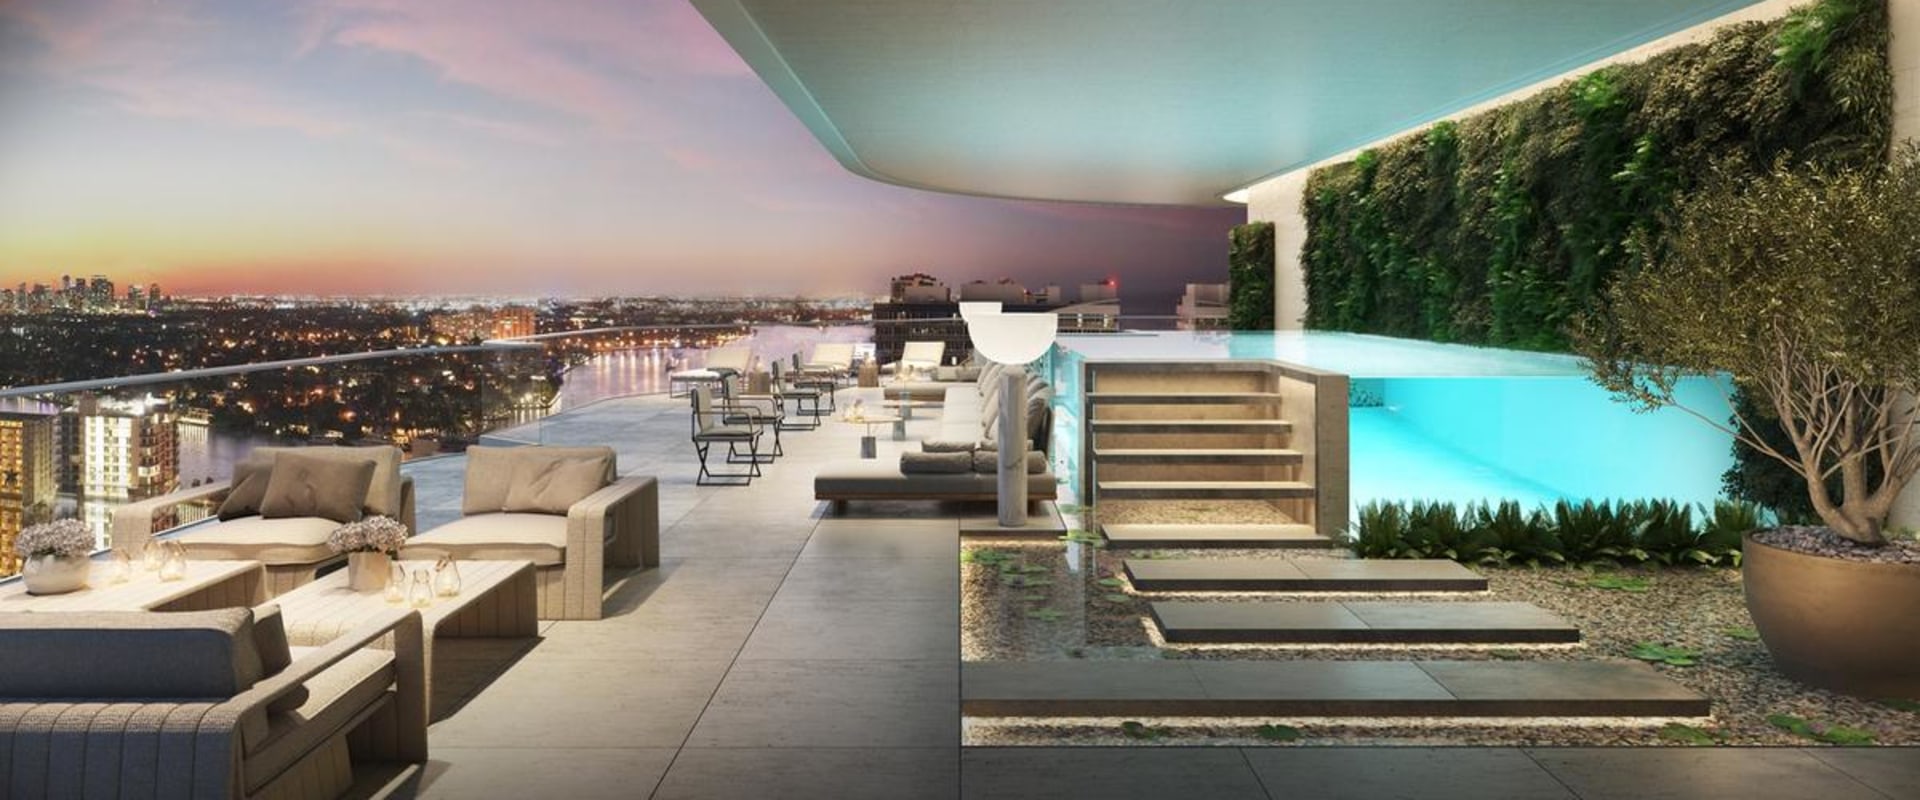 Luxurious Penthouses with Private Pools in Fort Lauderdale